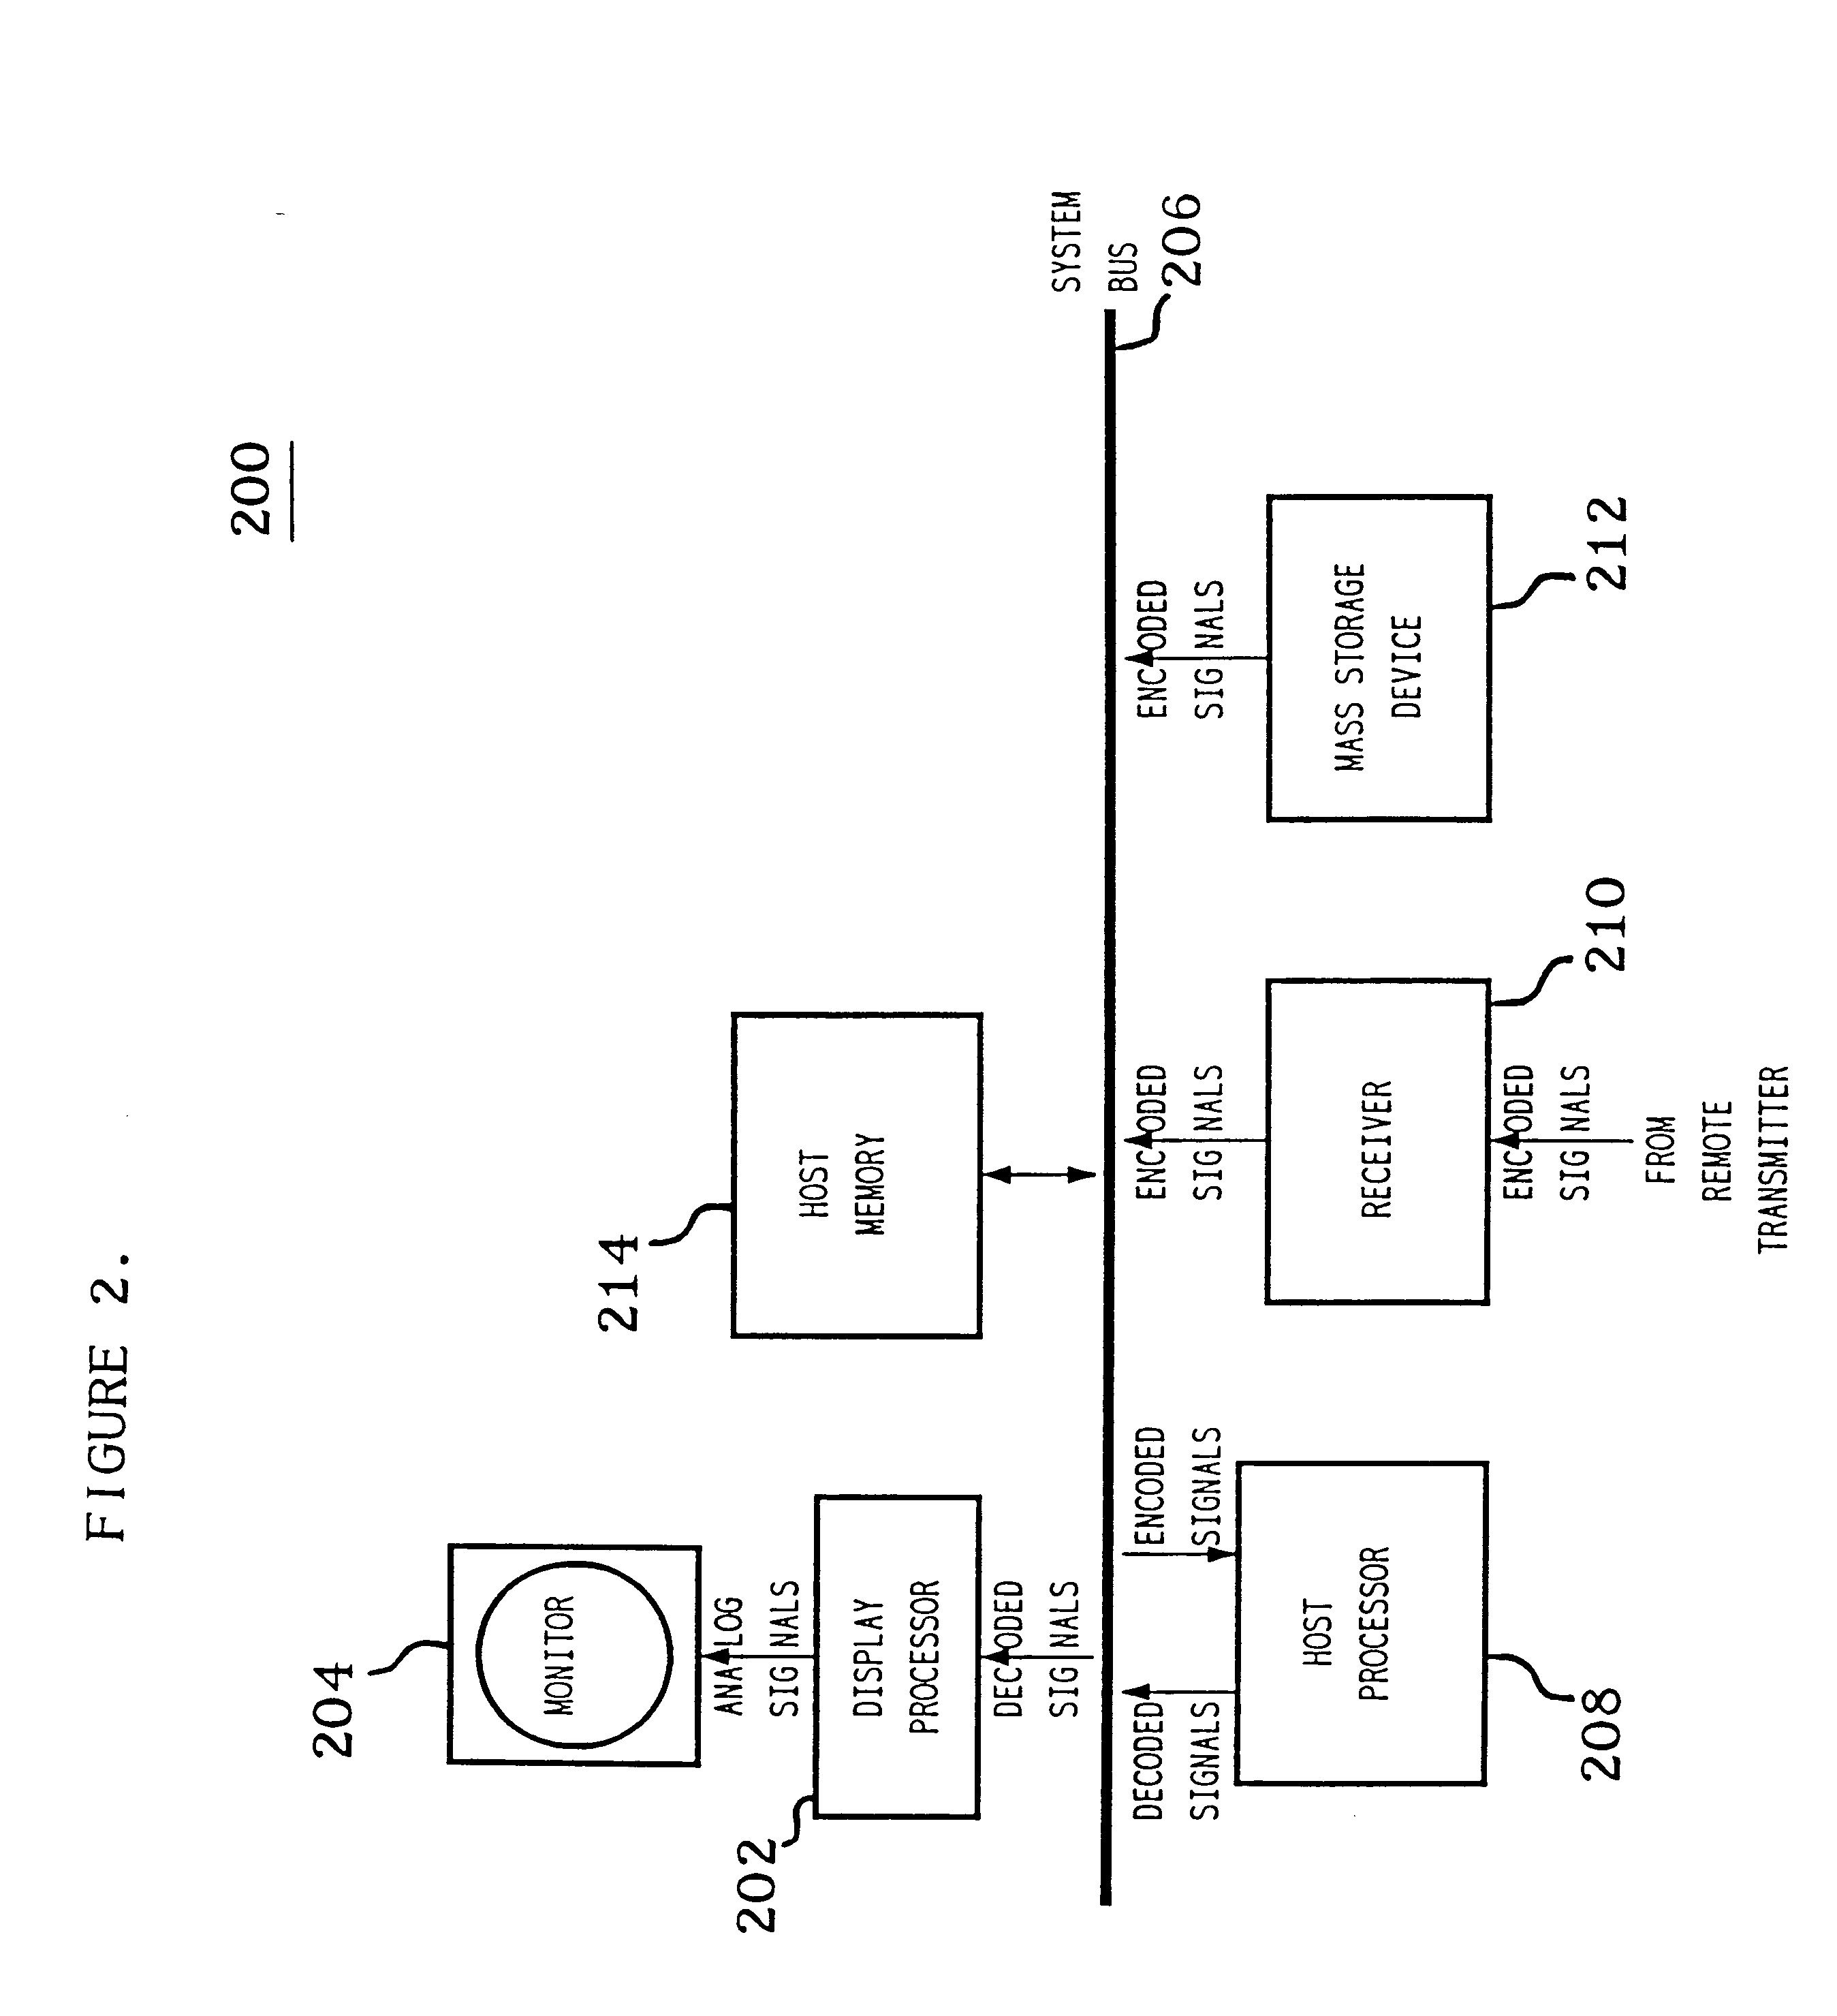 Processing image signals using spatial decomposition